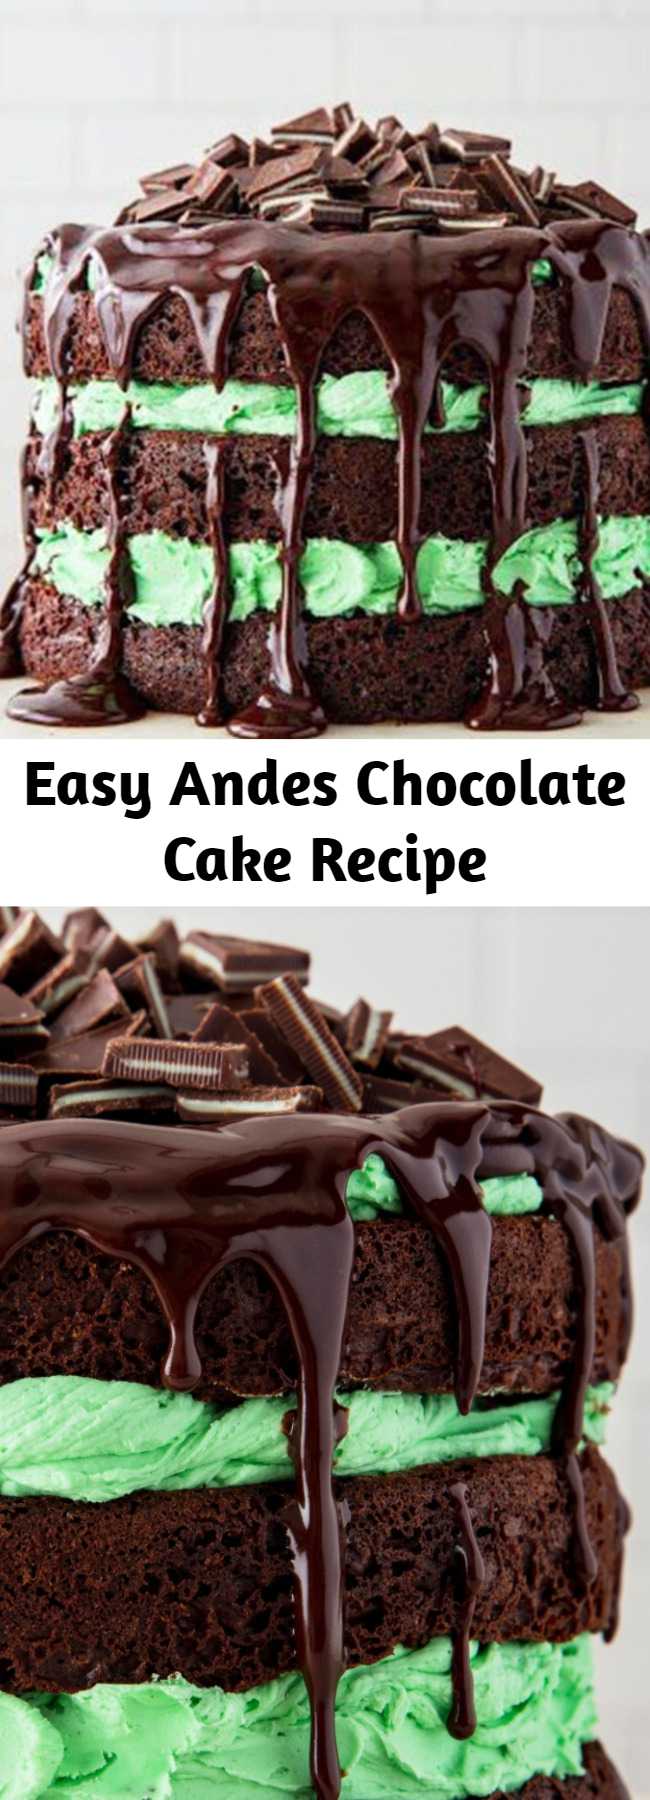 Easy Andes Chocolate Cake Recipe - Andes lovers will FREAK OUT over this gorgeous, minty layer cake. The layers of chocolate and mint buttercream will have you falling in love! #andes #layer #cake #mint #chocolate #dessert #recipe #easy